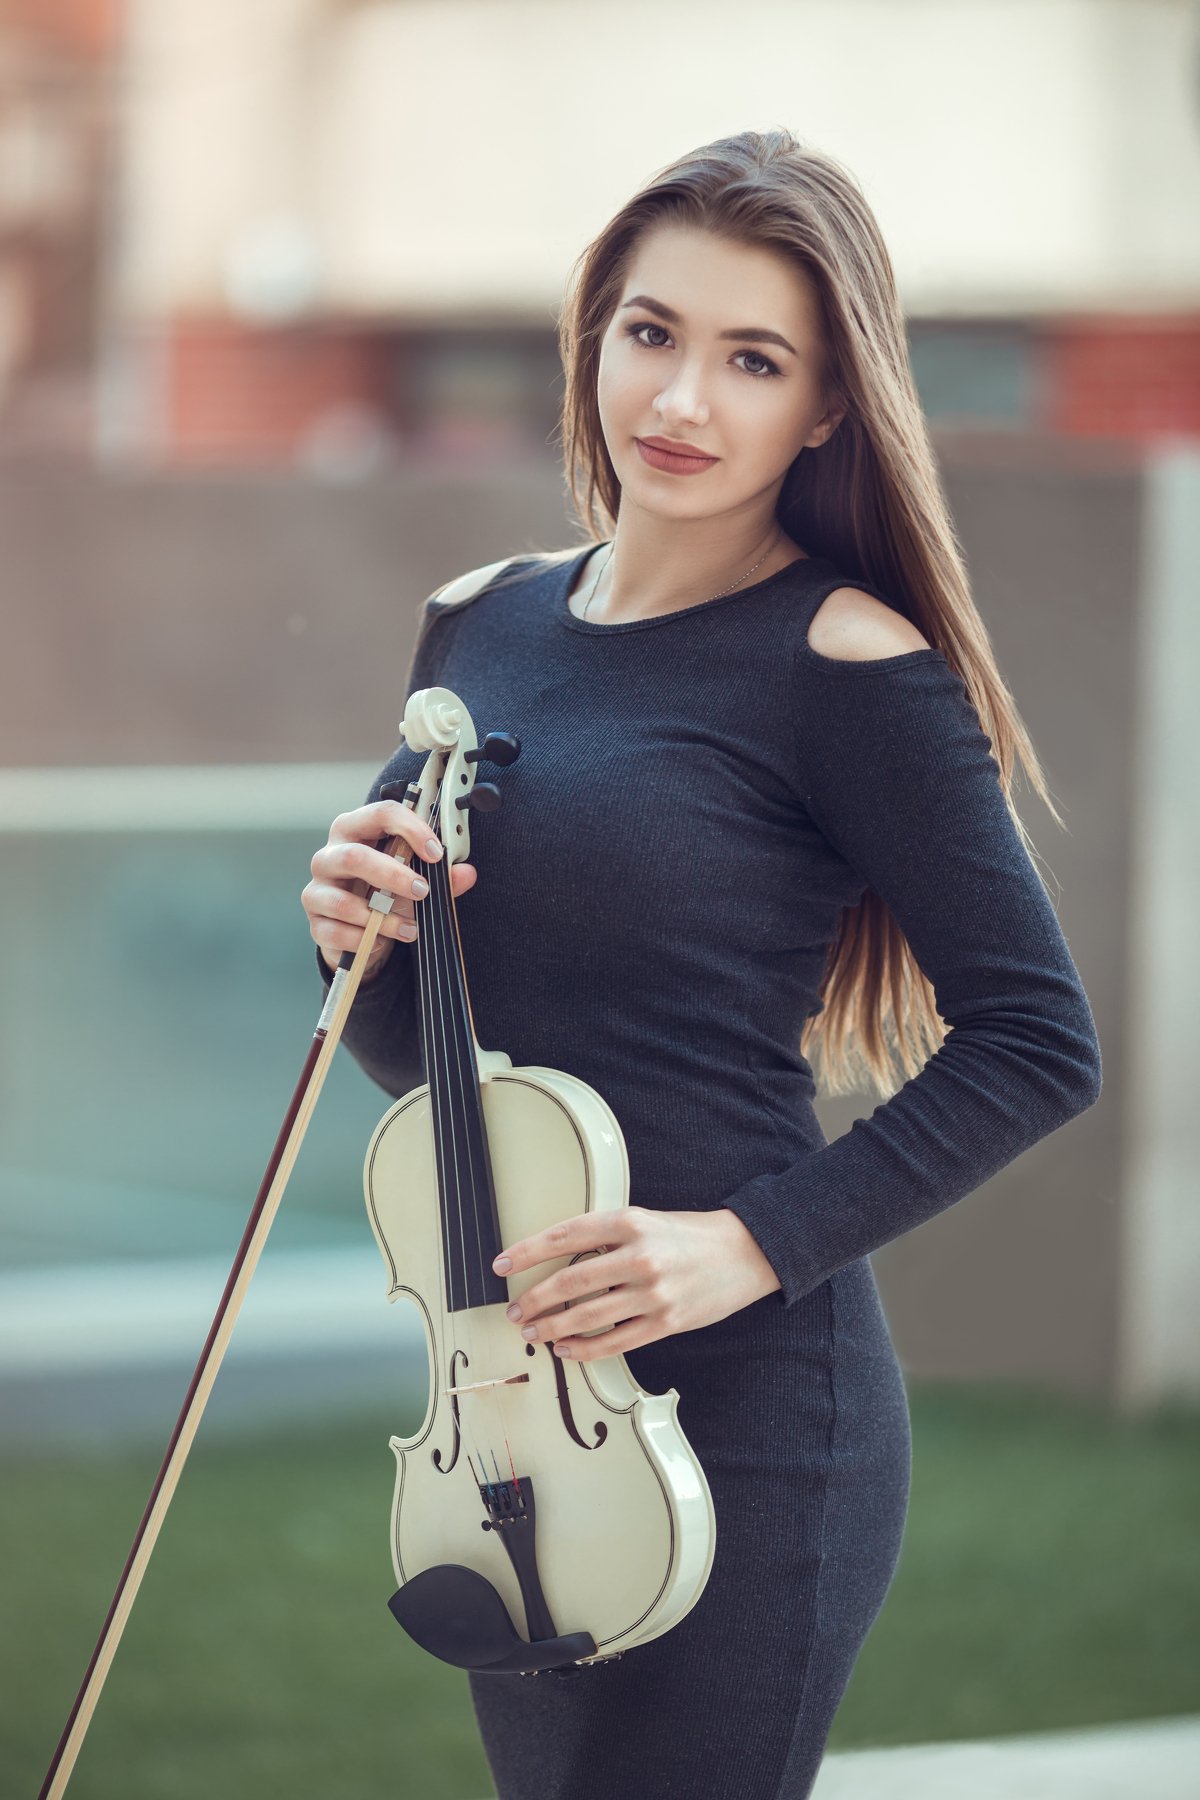 girl, model, young, beauty, style, color, photography, shooting, photoshoot, picture, canon, 135mm, bokeh, retouch, art, follow, instagram, fashion, people, daylight, natural light, violin, amazing, Andrei Marginean